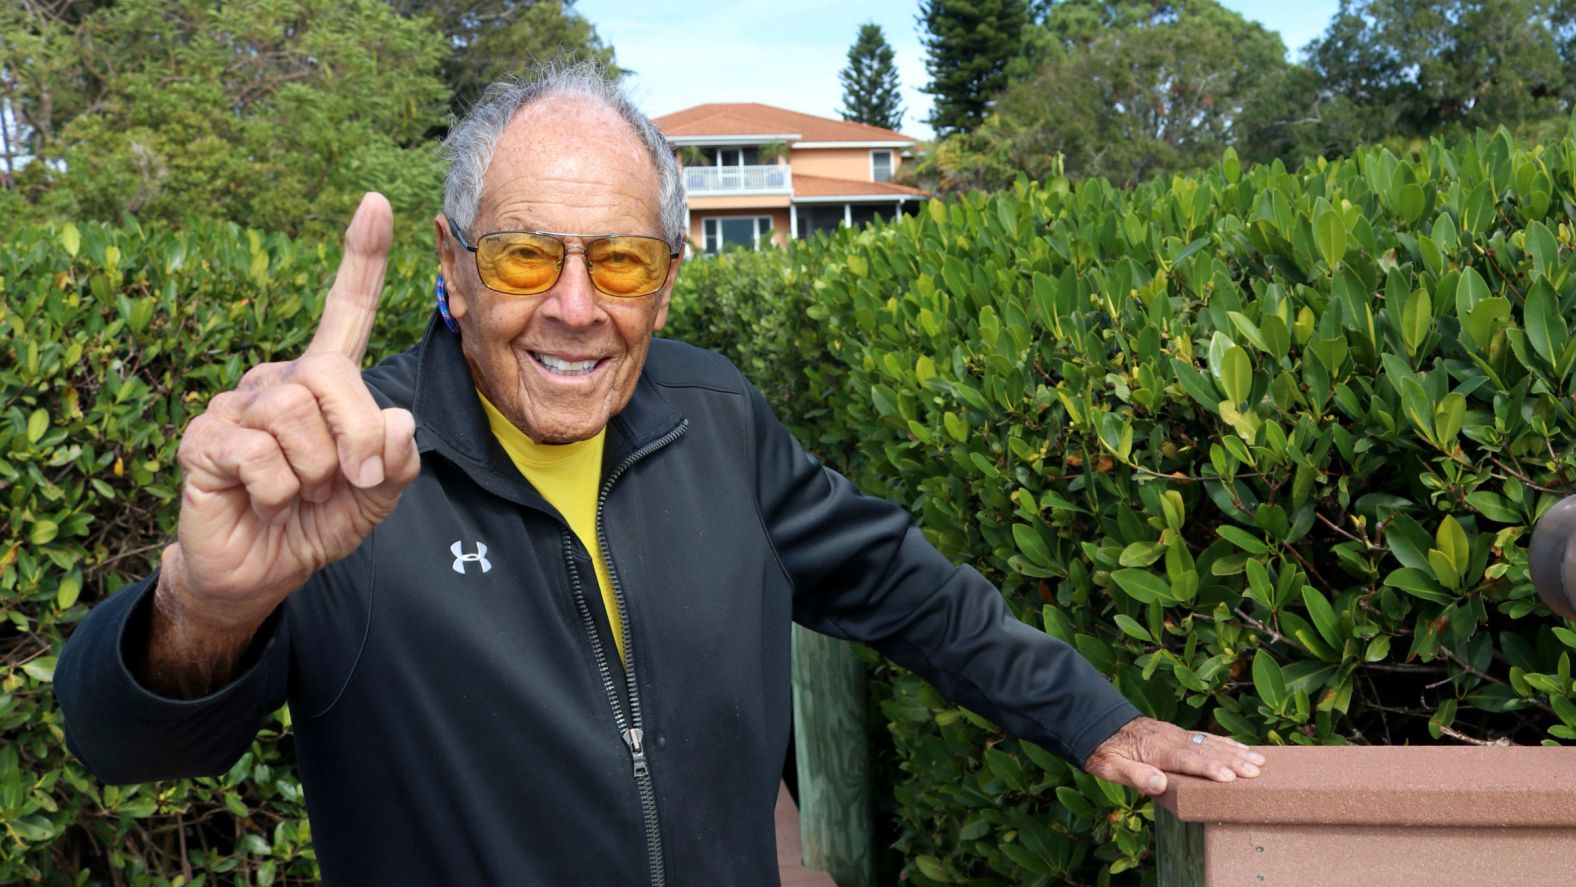 <a href="index.php?page=&url=https%3A%2F%2Fwww.cnn.com%2F2022%2F12%2F05%2Ftennis%2Fnick-bollettieri-death-tennis-coach-spt-intl%2Findex.html" target="_blank">Nick Bollettieri,</a> the famed tennis coach who taught the likes of the Williams sisters, Andre Agassi and Maria Sharapova, died at the age of 91, the IMG Academy confirmed on December 5.